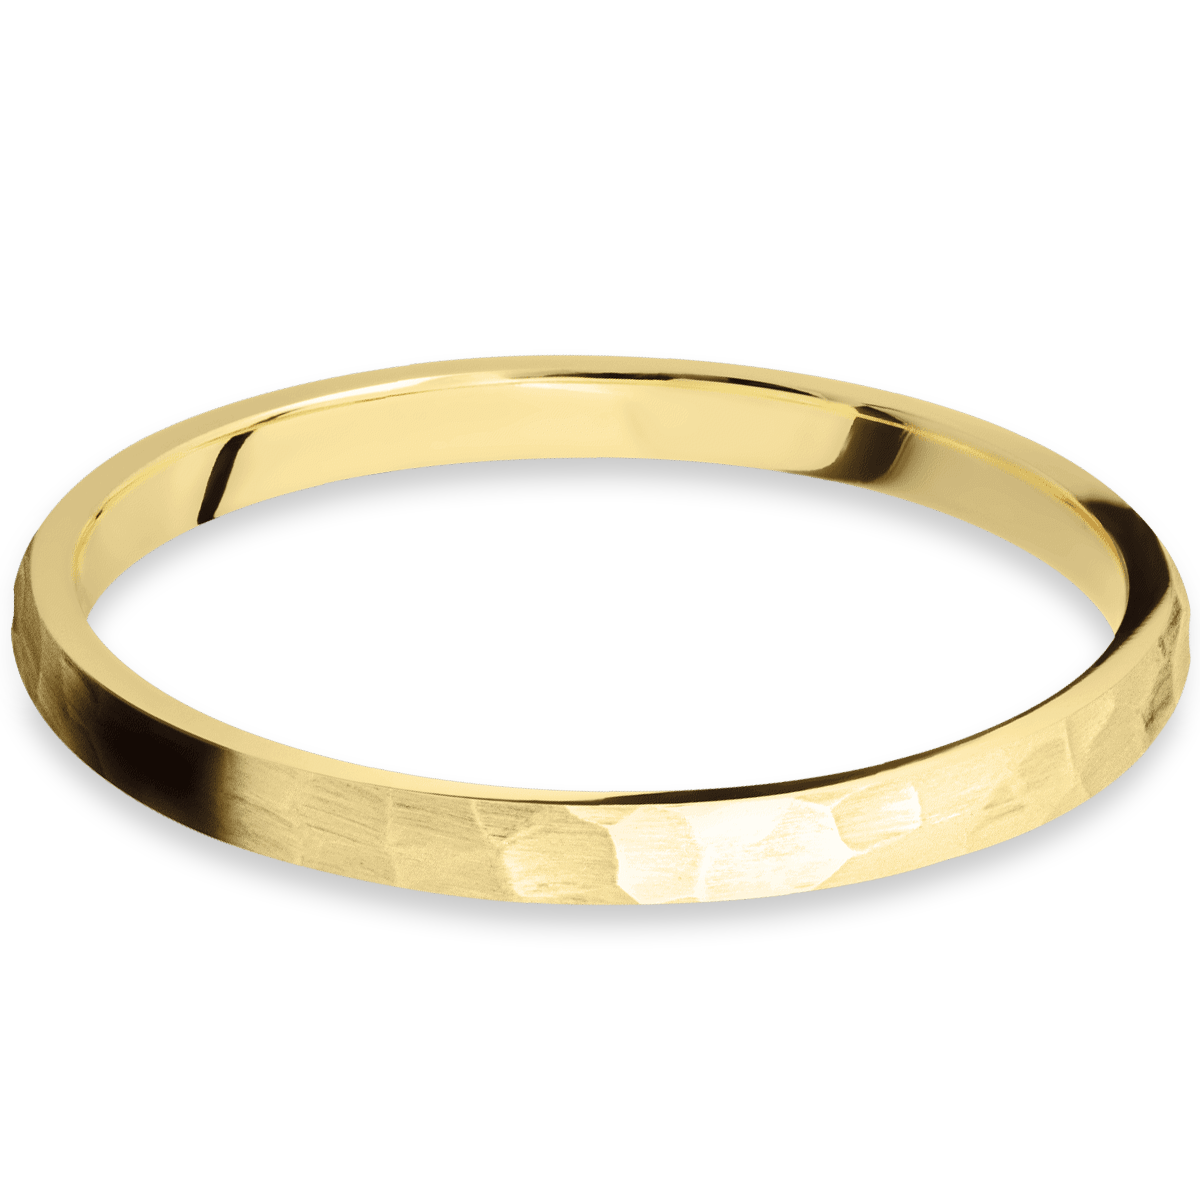 Yellow Gold + Hammer Finish Womens Wedding or Everyday Ring